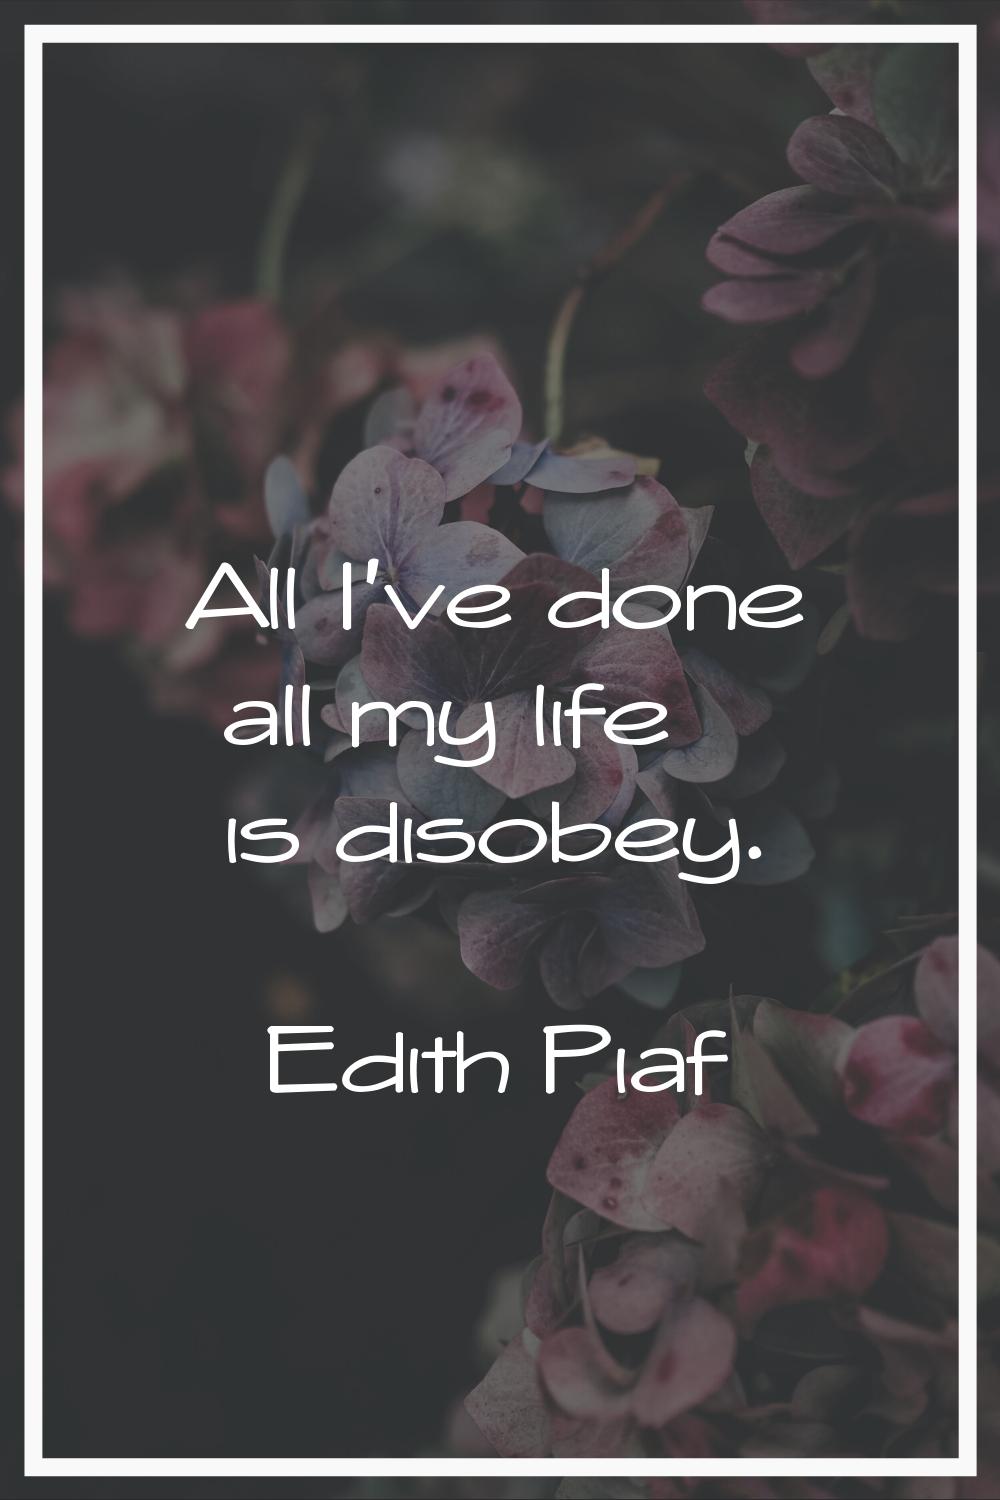 All I've done all my life is disobey.